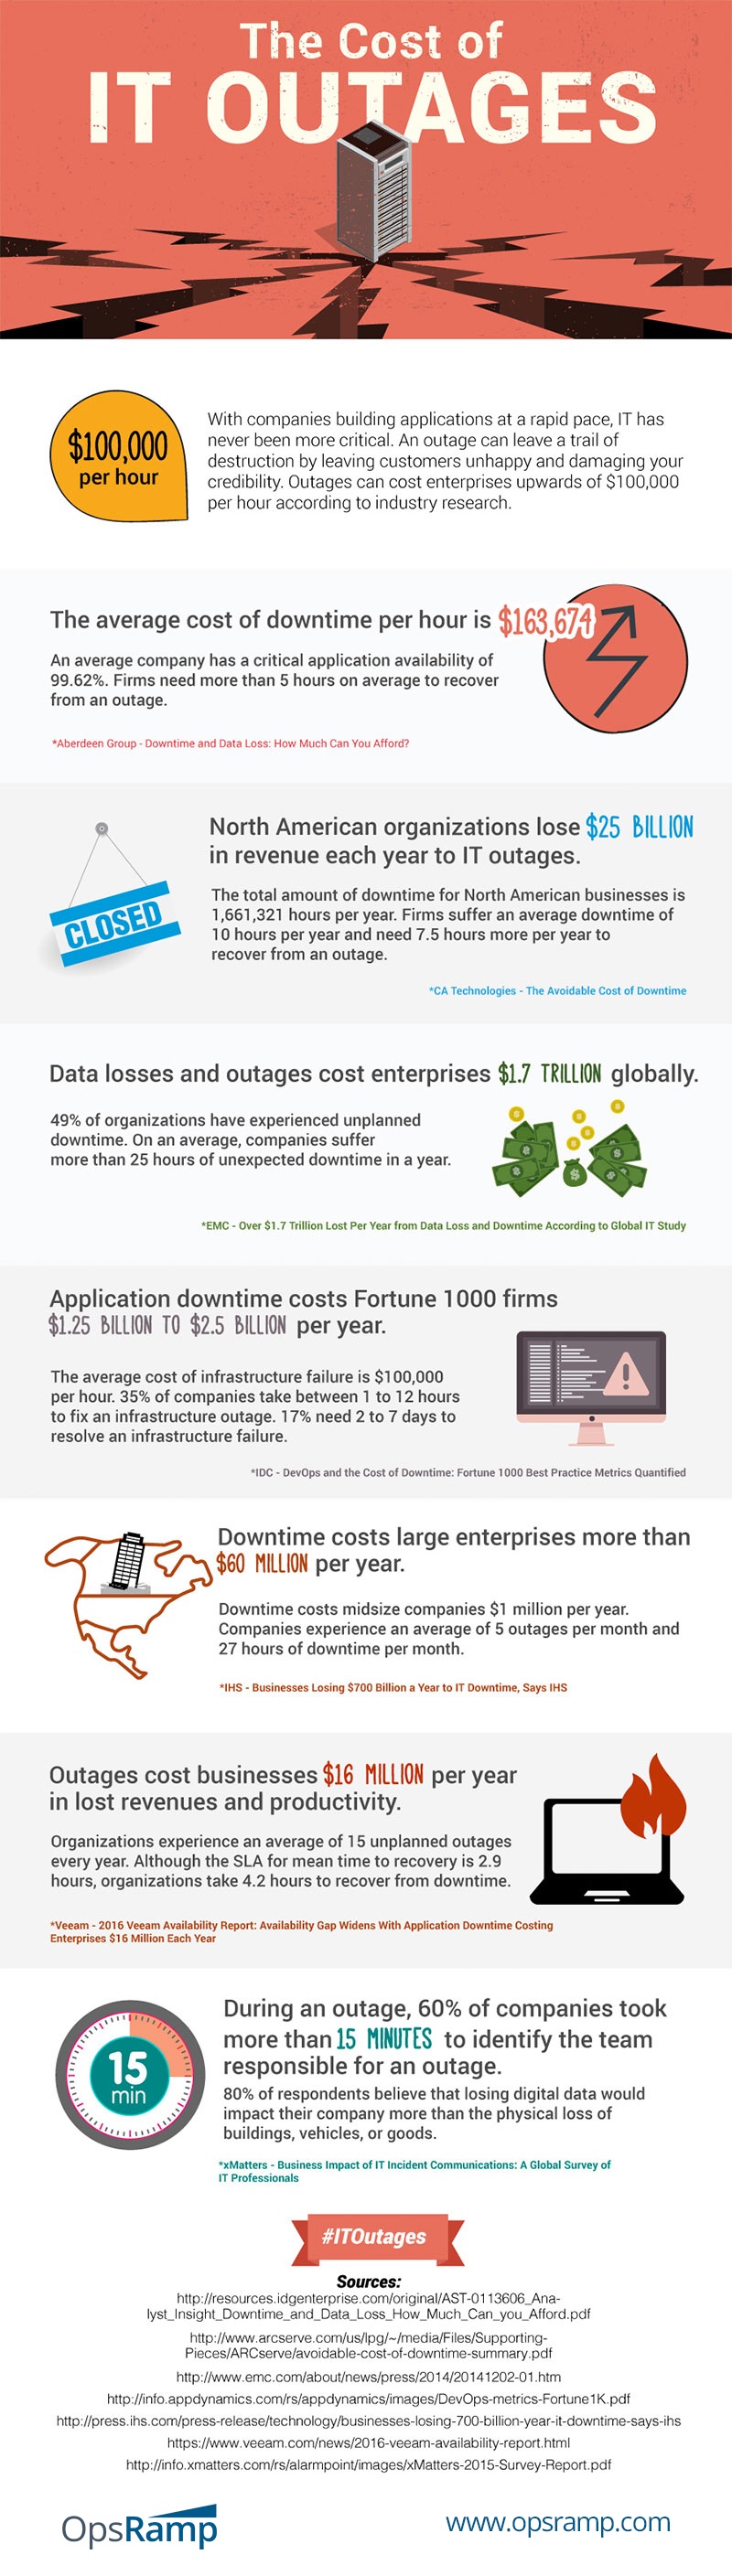 The Cost of IT Outages